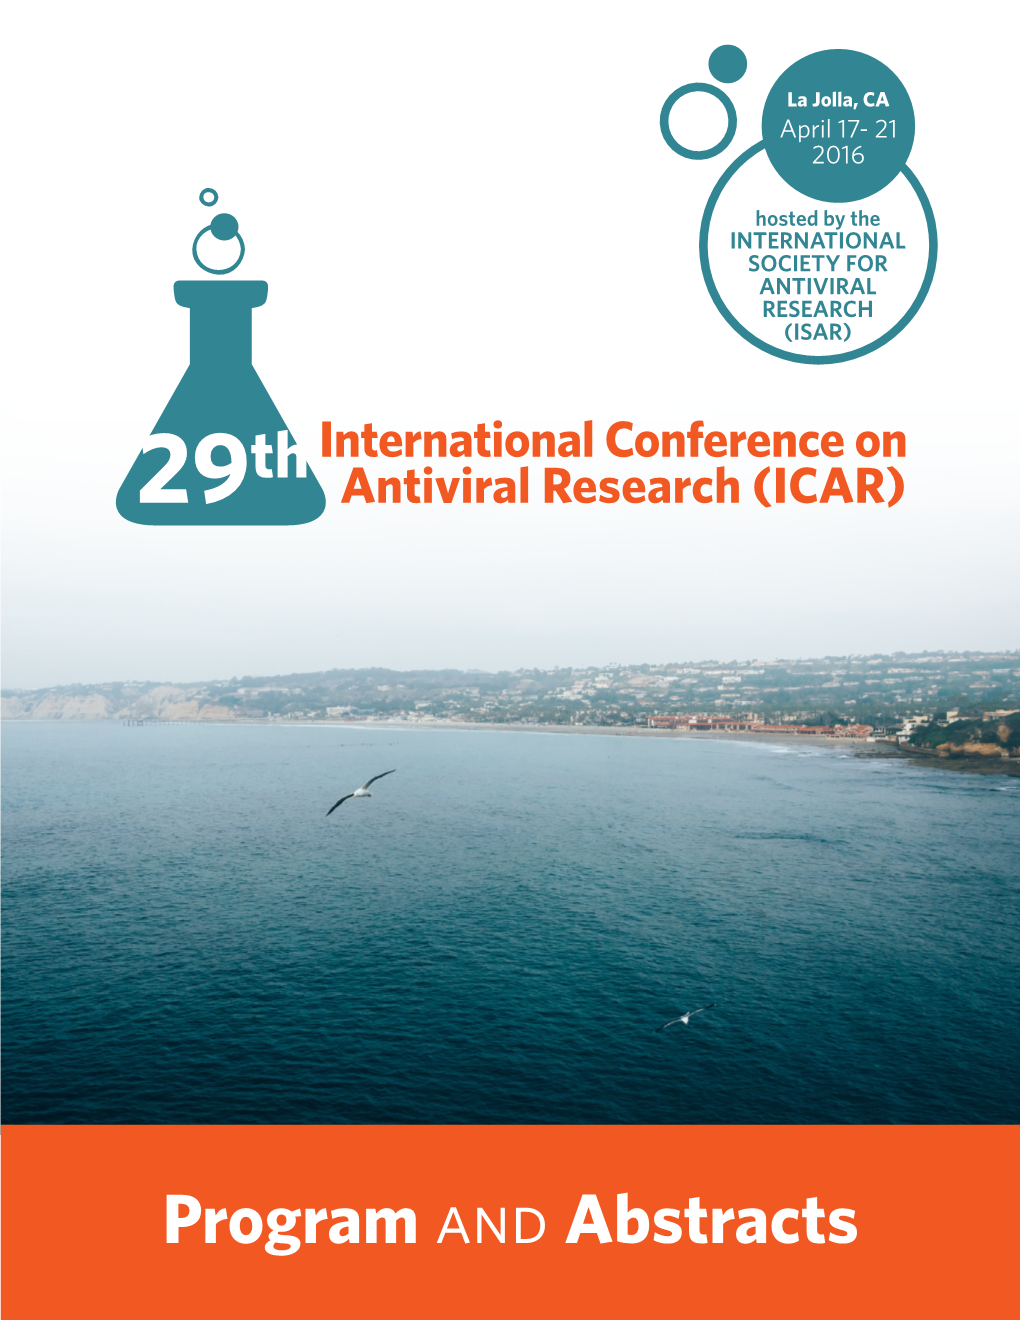 29Th International Conference on Antiviral Research (ICAR) 2 International Conference on DAILY Antiviral Research (ICAR) SCHEDULE